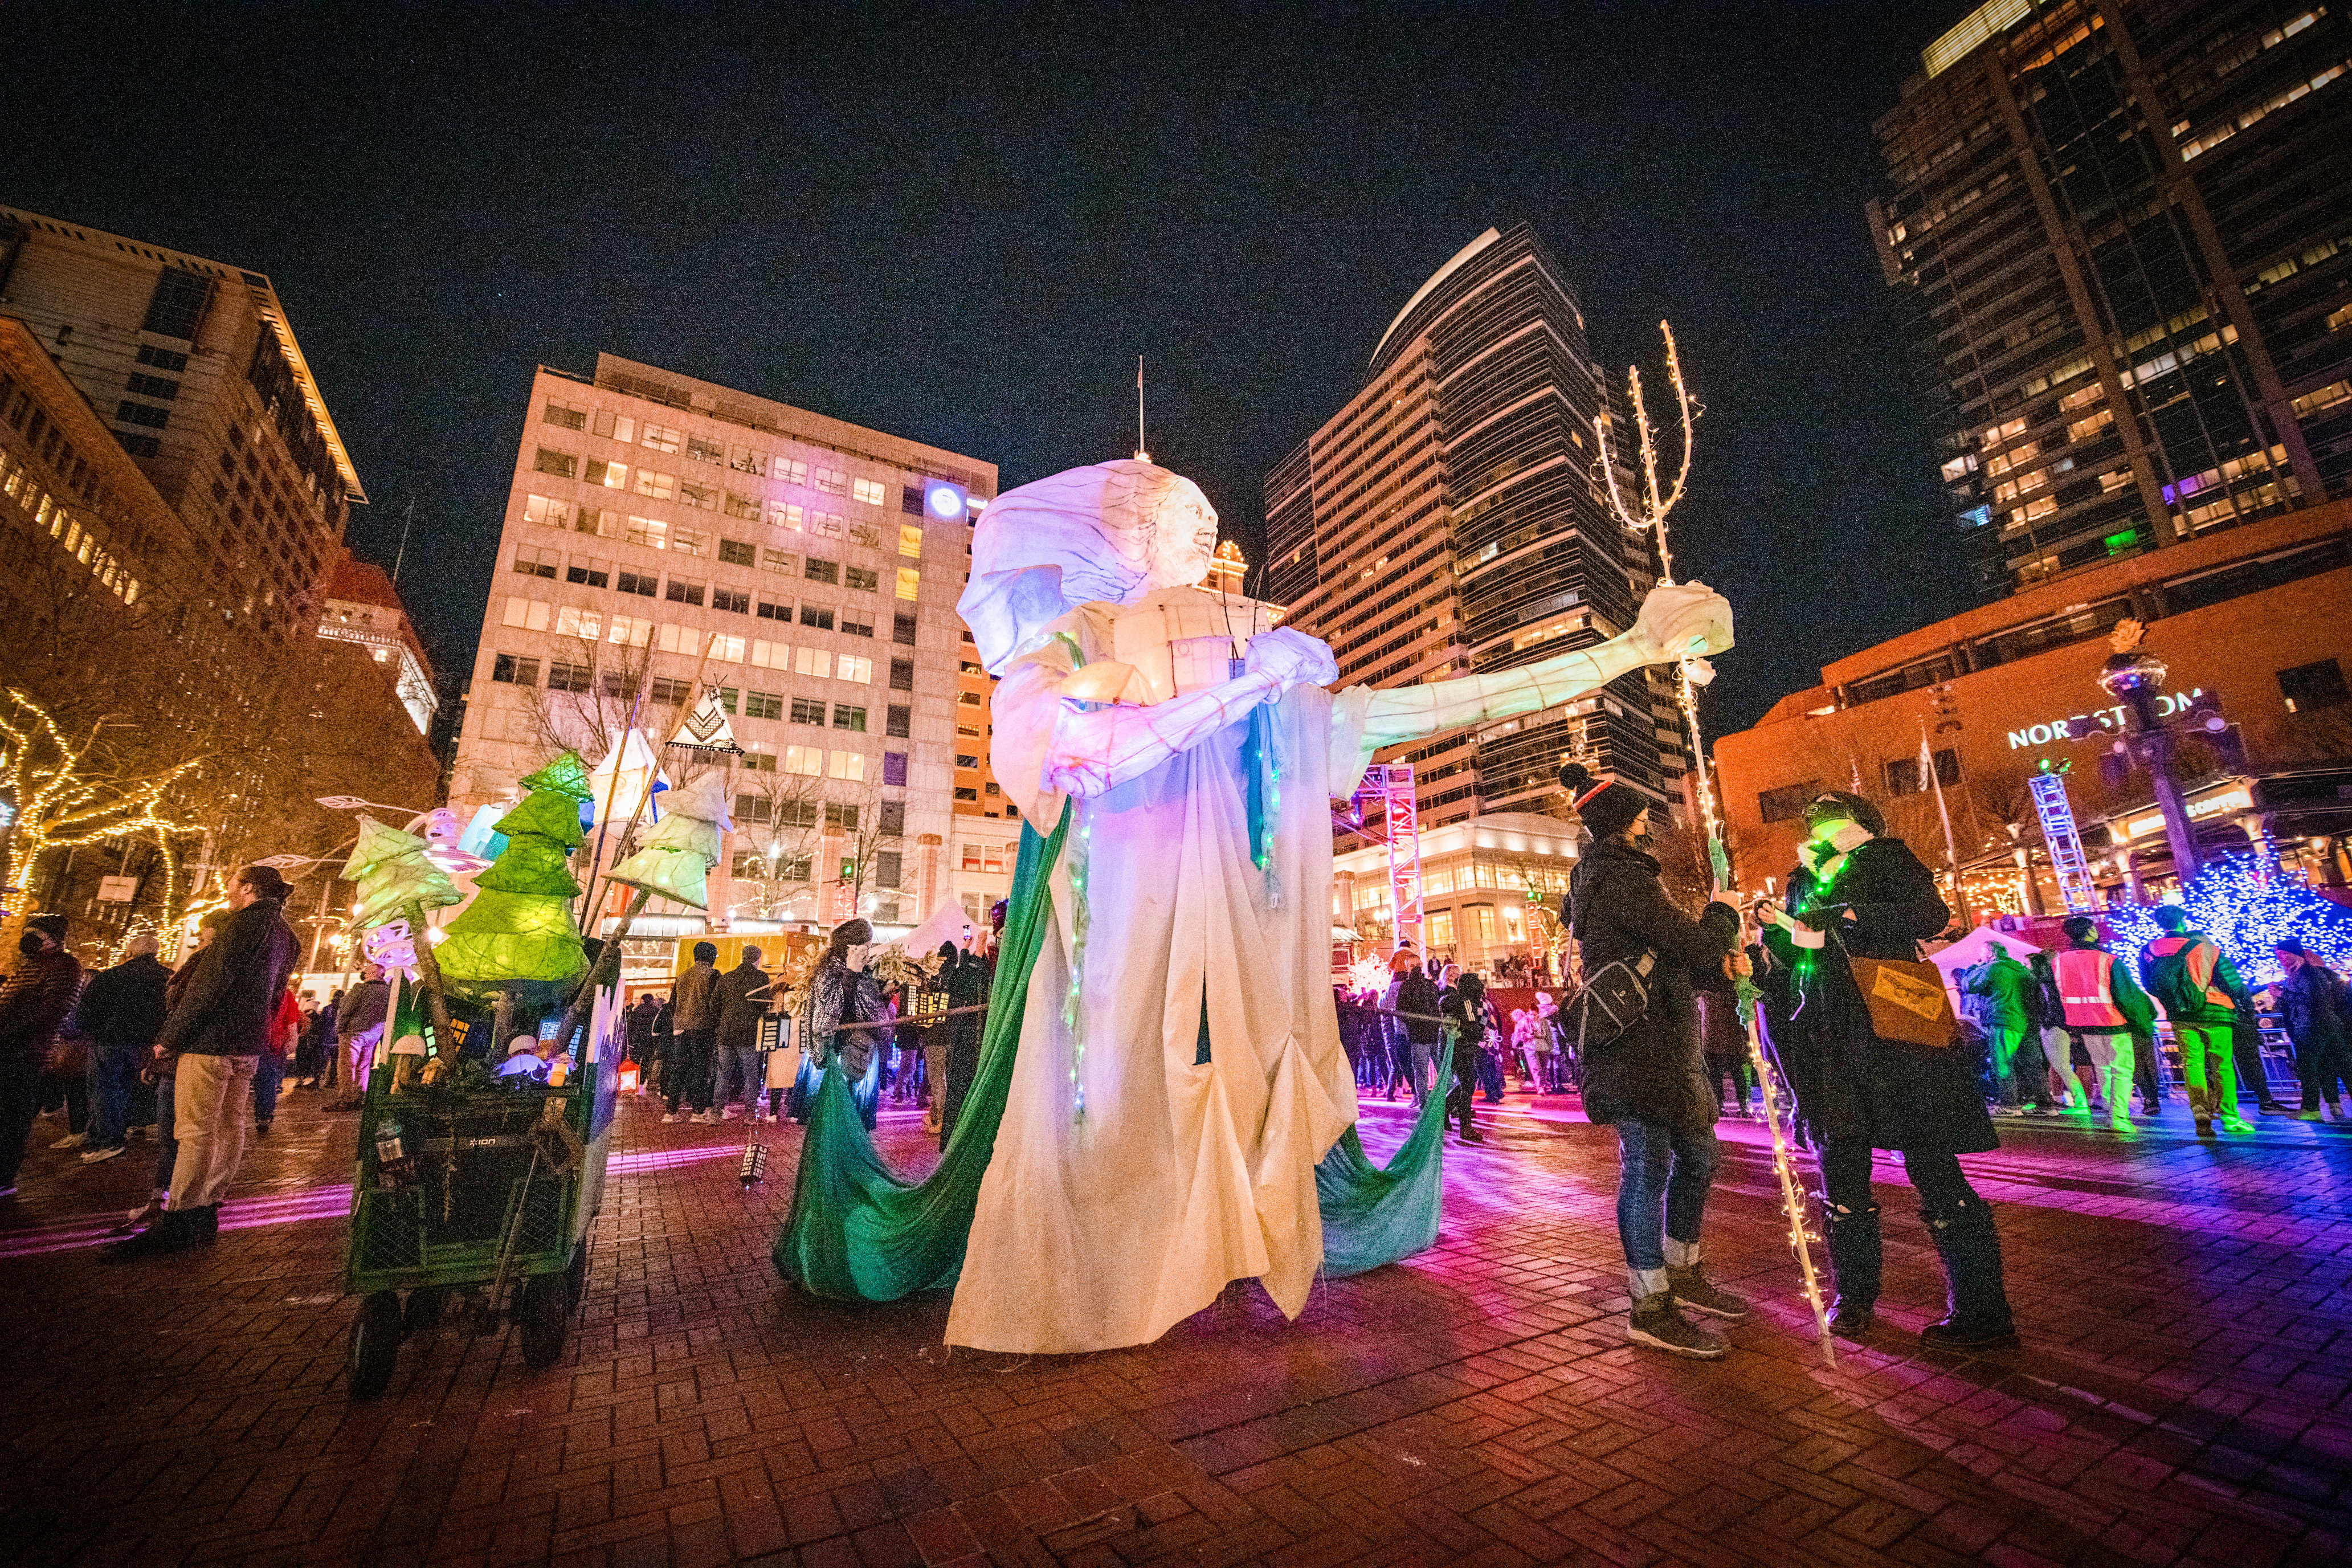 The Lady Portlandia by RAWR during the lantern procession at the 2022 Portland Winter LIght Festival. Photo © 2022 Dylan Evanston